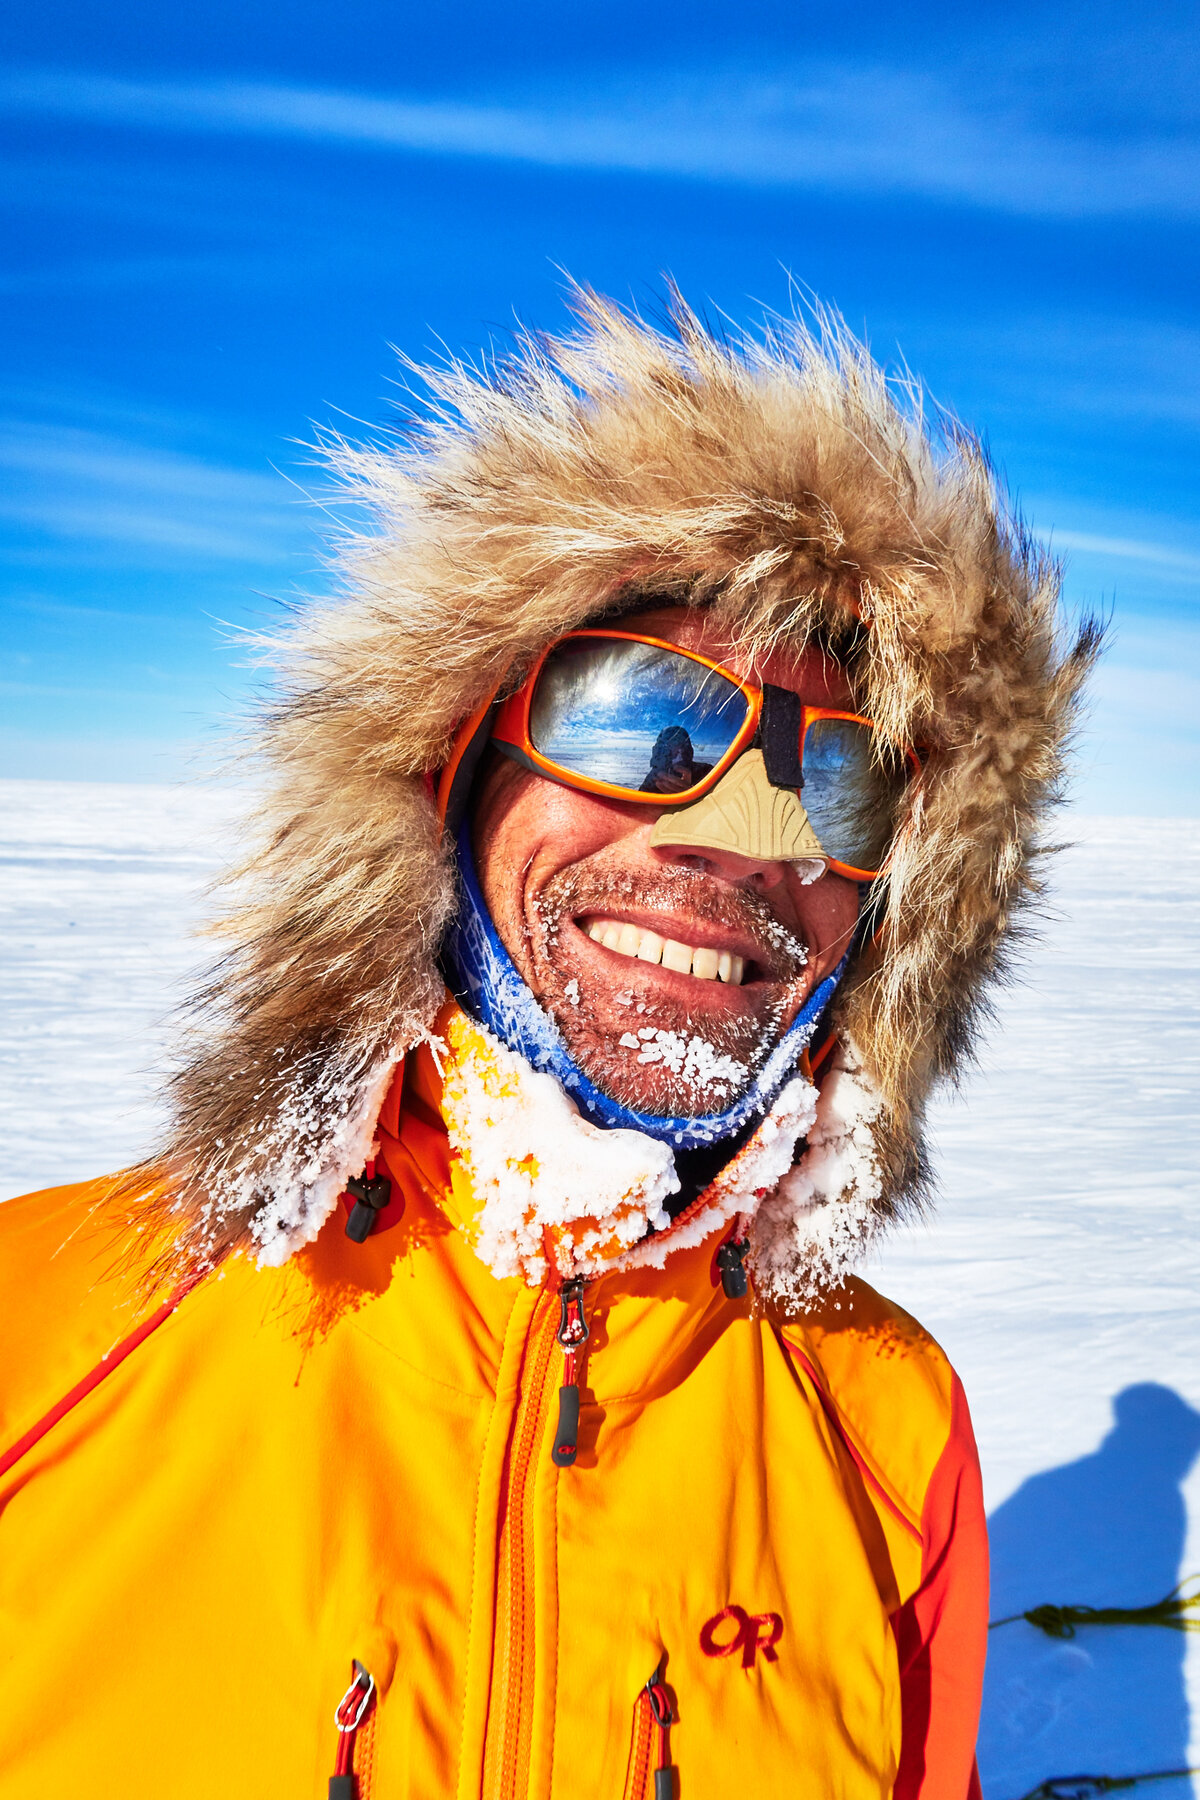 Skier smiles wearing fur ruff, sunglasses, and nose shield